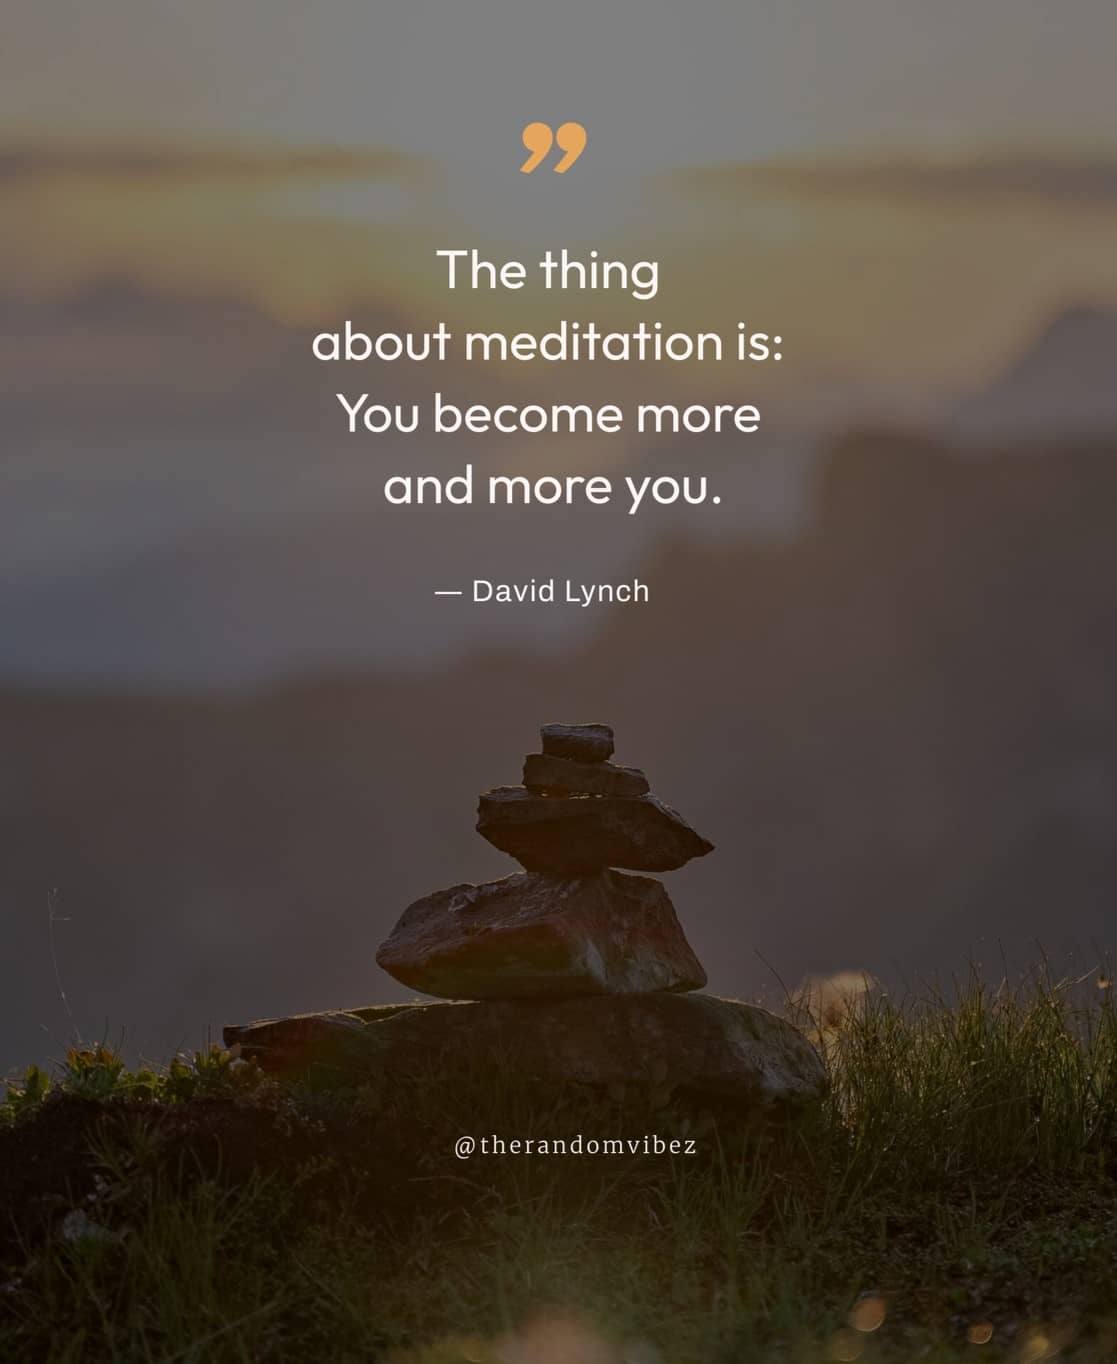 90 Meditation Quotes For Inner Peace & Calm Mind (Relax) – The Random Vibez